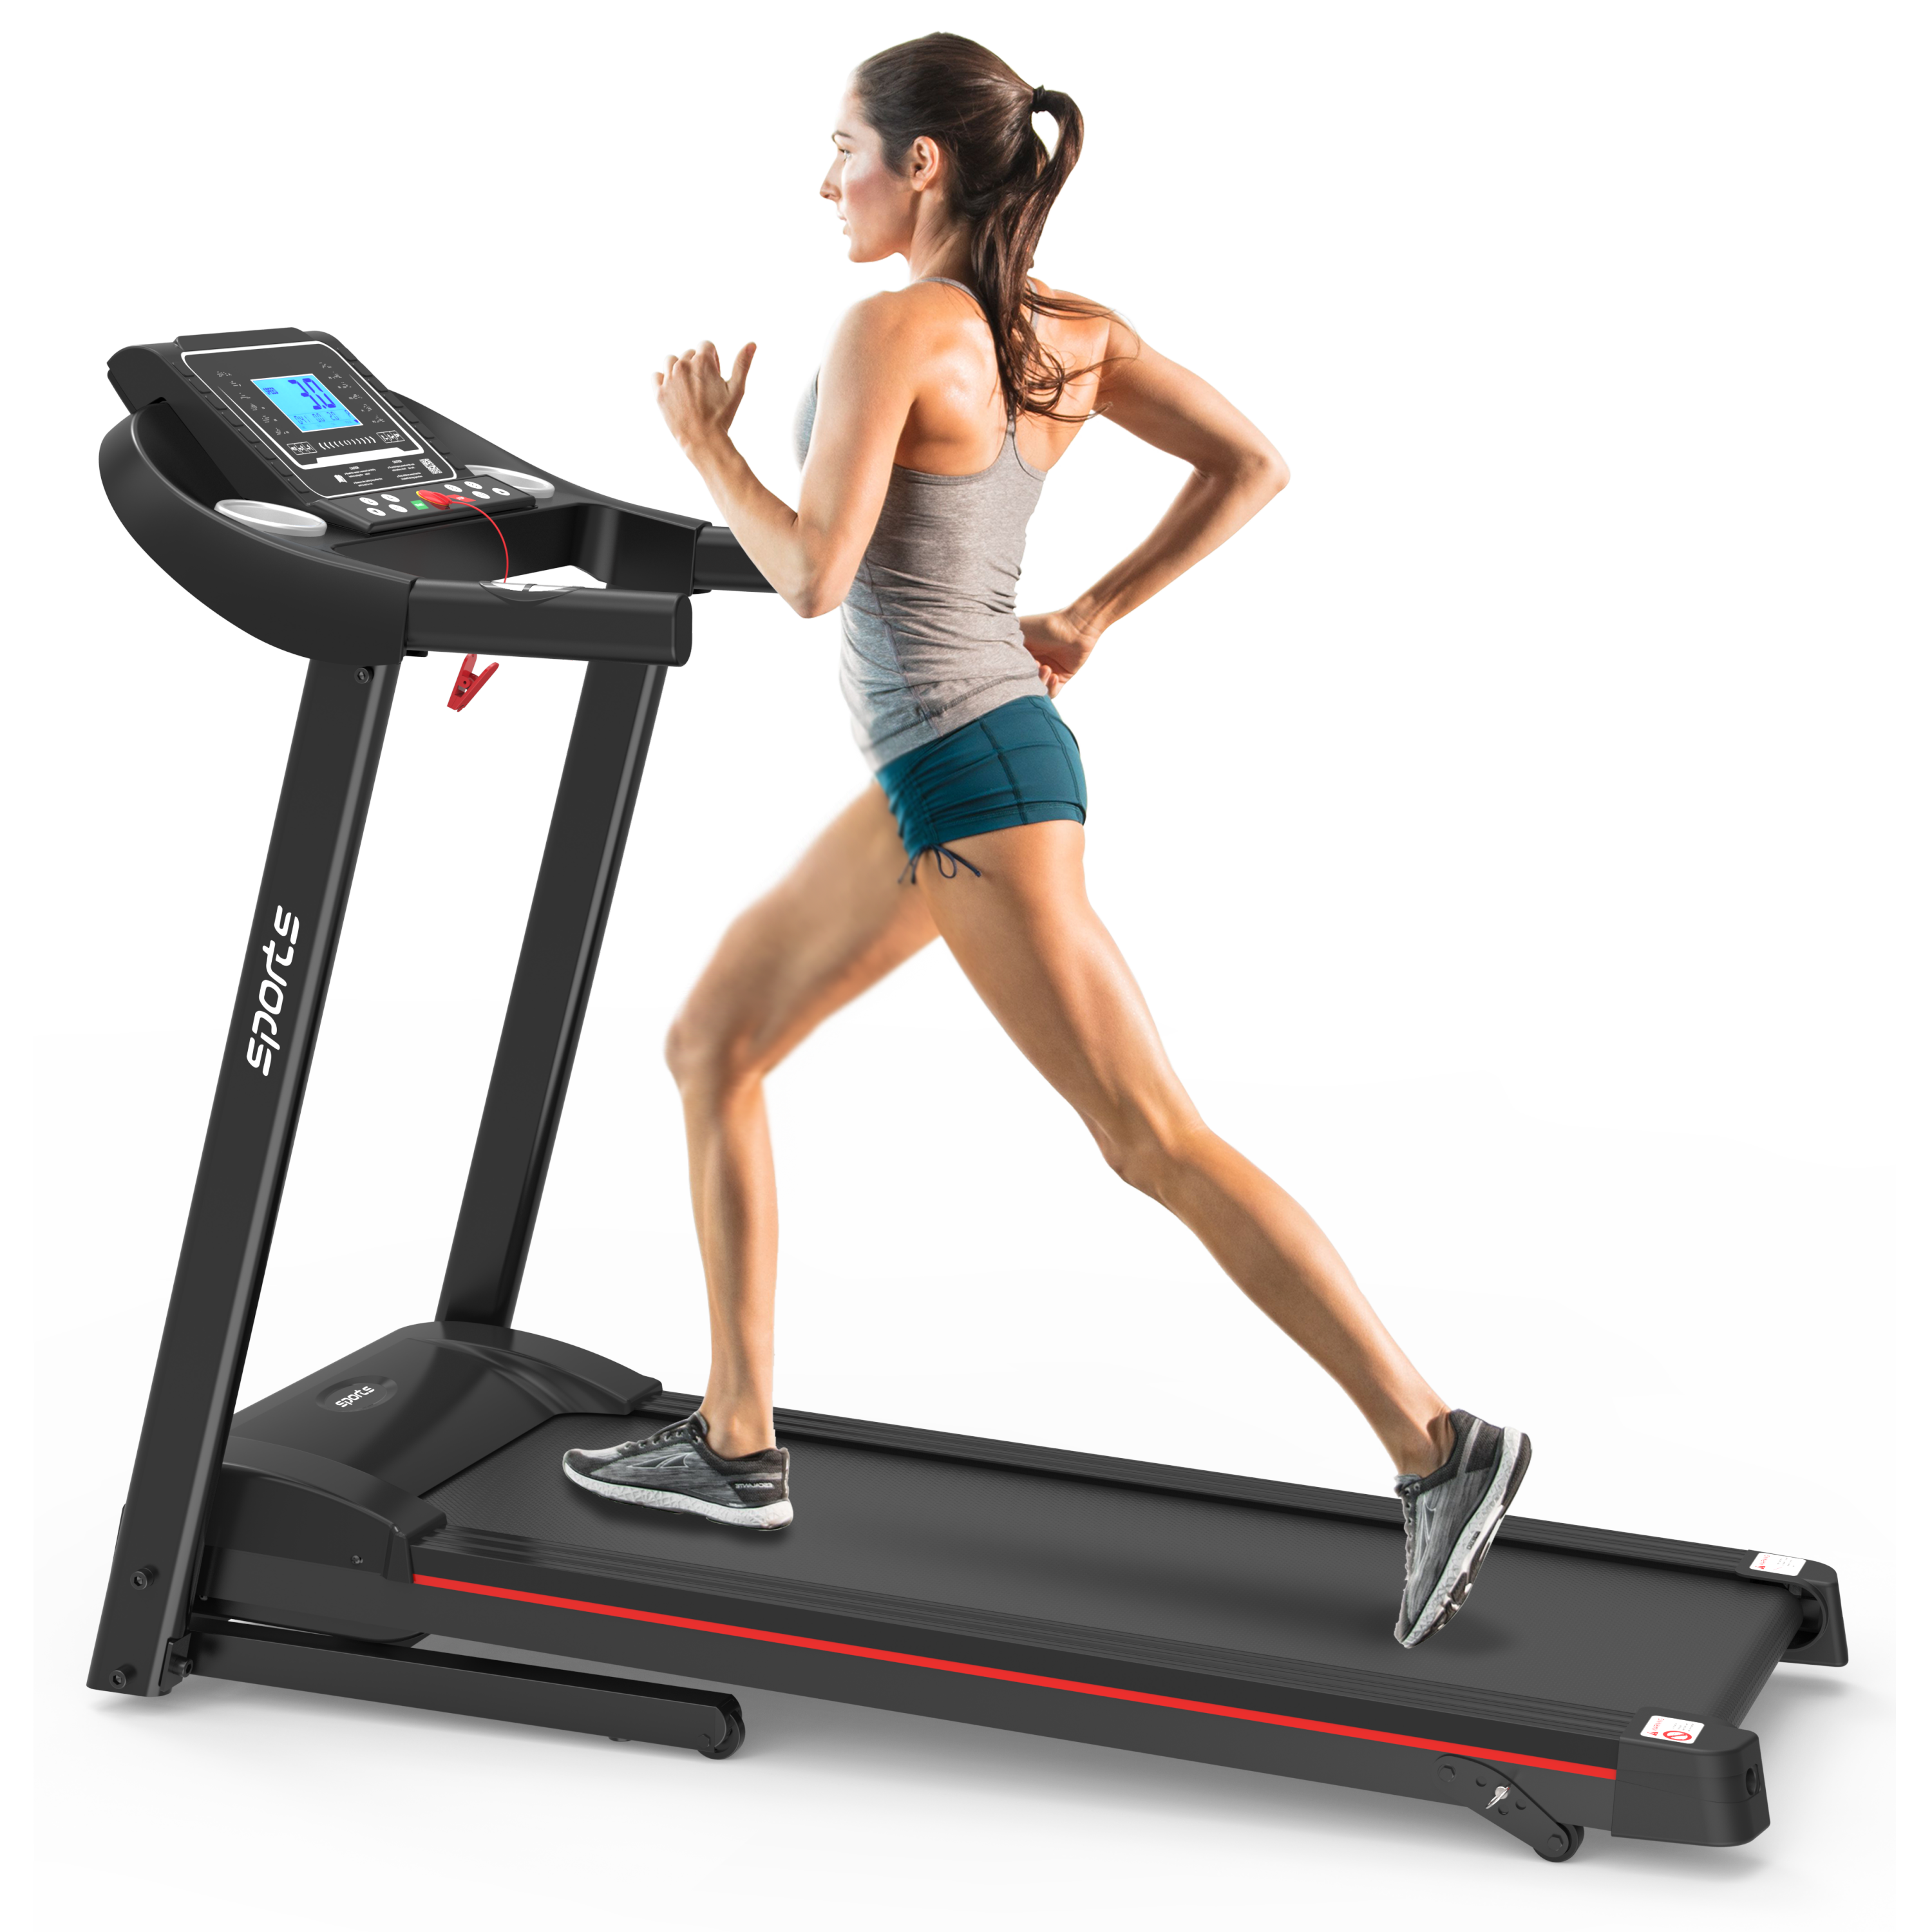 Fitshow App Home Foldable Treadmill with Incline, Folding Treadmill for Home Workout, Electric Walking Running Treadmill Machine 5" LCD Screen 250 LB Capacity Bluetooth Music